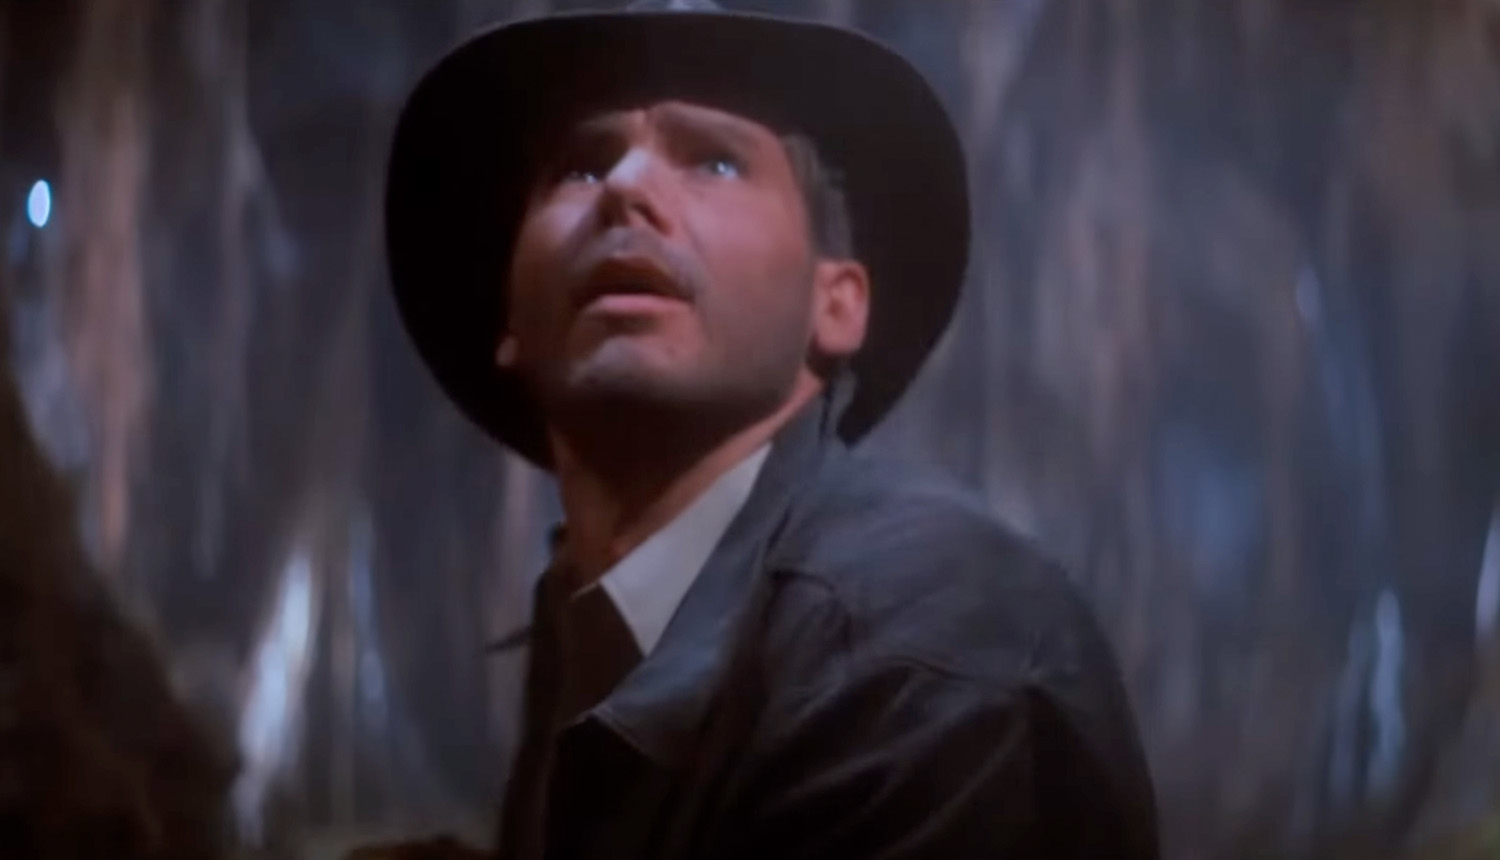 Things The Indiana Jones Movies Get Right About History